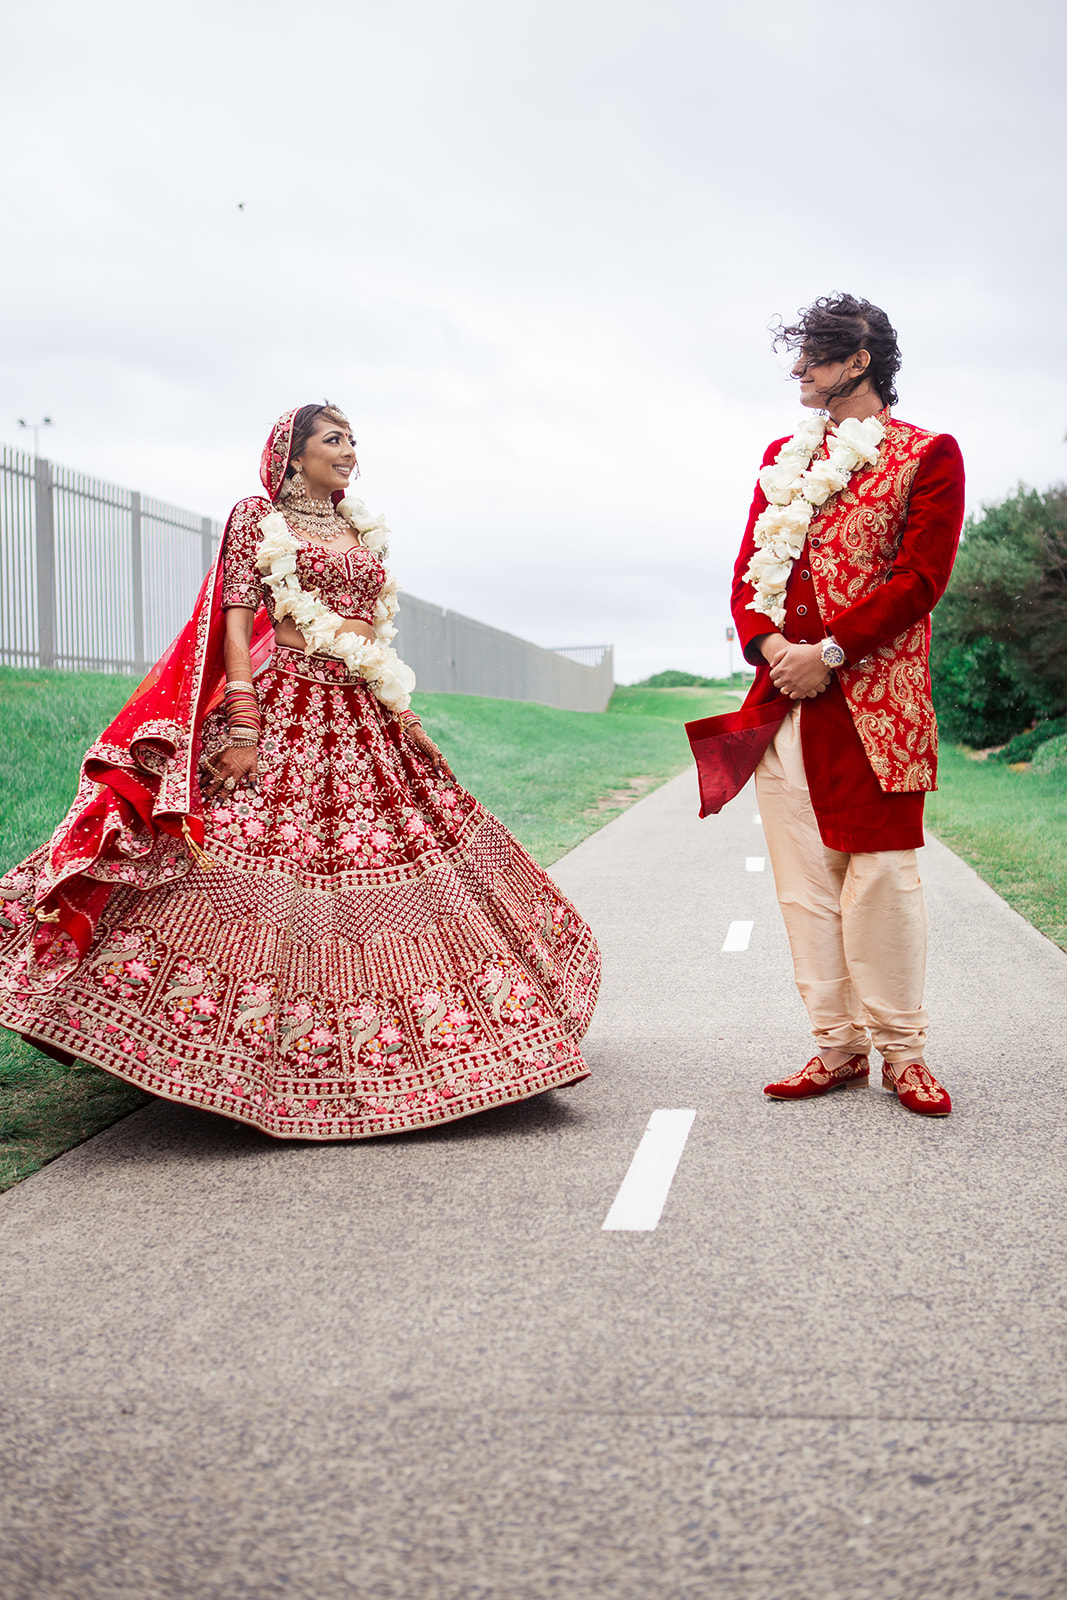 City Beach Function Centre wedding for Prianca and Karan. Photographed by Rolling Canvas Photography